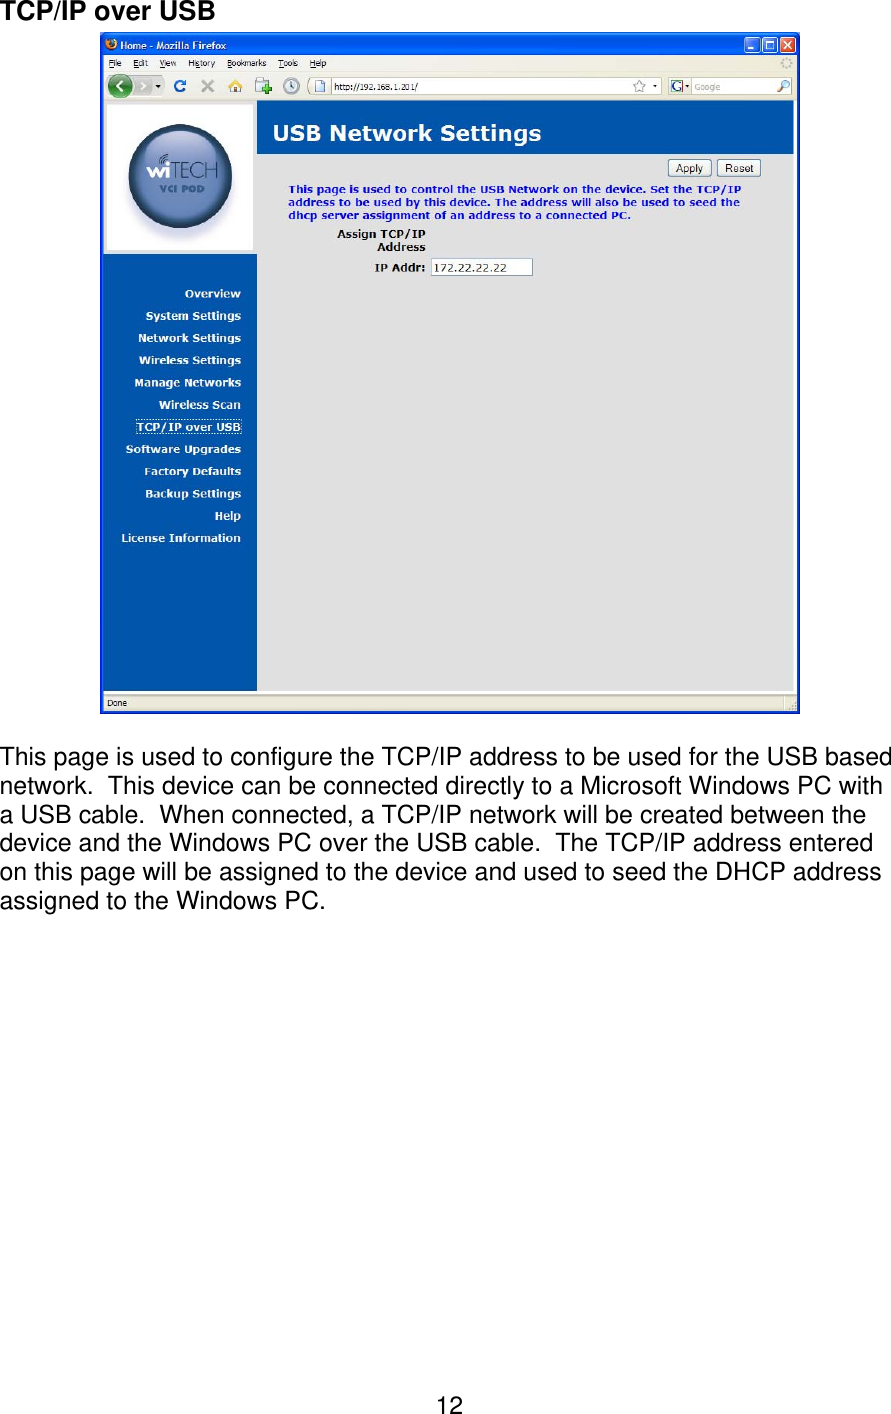   12TCP/IP over USB   This page is used to configure the TCP/IP address to be used for the USB based network.  This device can be connected directly to a Microsoft Windows PC with a USB cable.  When connected, a TCP/IP network will be created between the device and the Windows PC over the USB cable.  The TCP/IP address entered on this page will be assigned to the device and used to seed the DHCP address assigned to the Windows PC. 